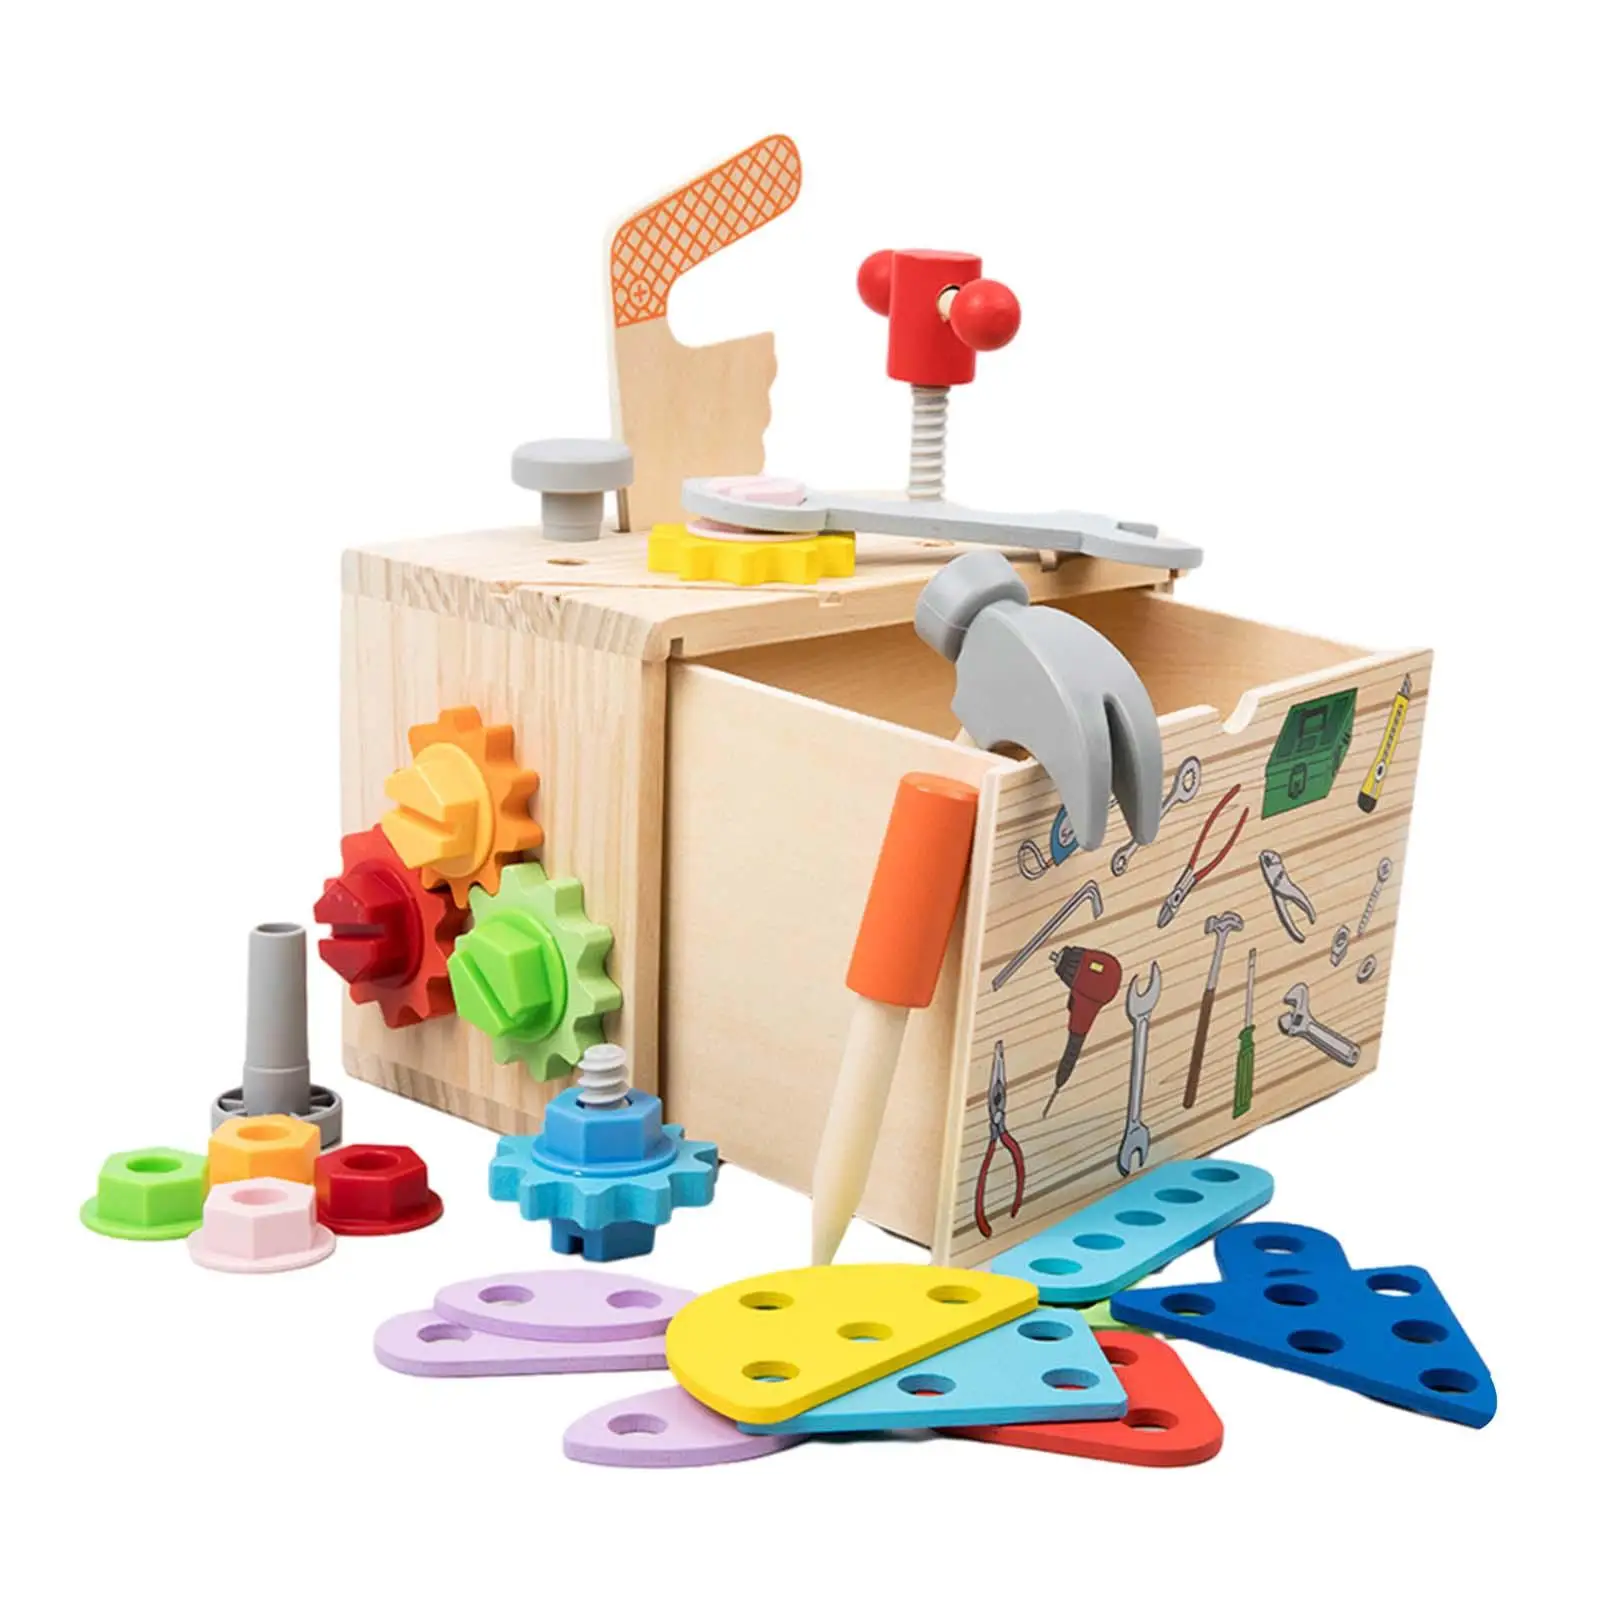 Wooden Toolbox Toy Creative Drawer Type Durable Kids Play Tool Set for Girls Boys Birthday 2 3 4 5 Years Old Toddlers Festivals